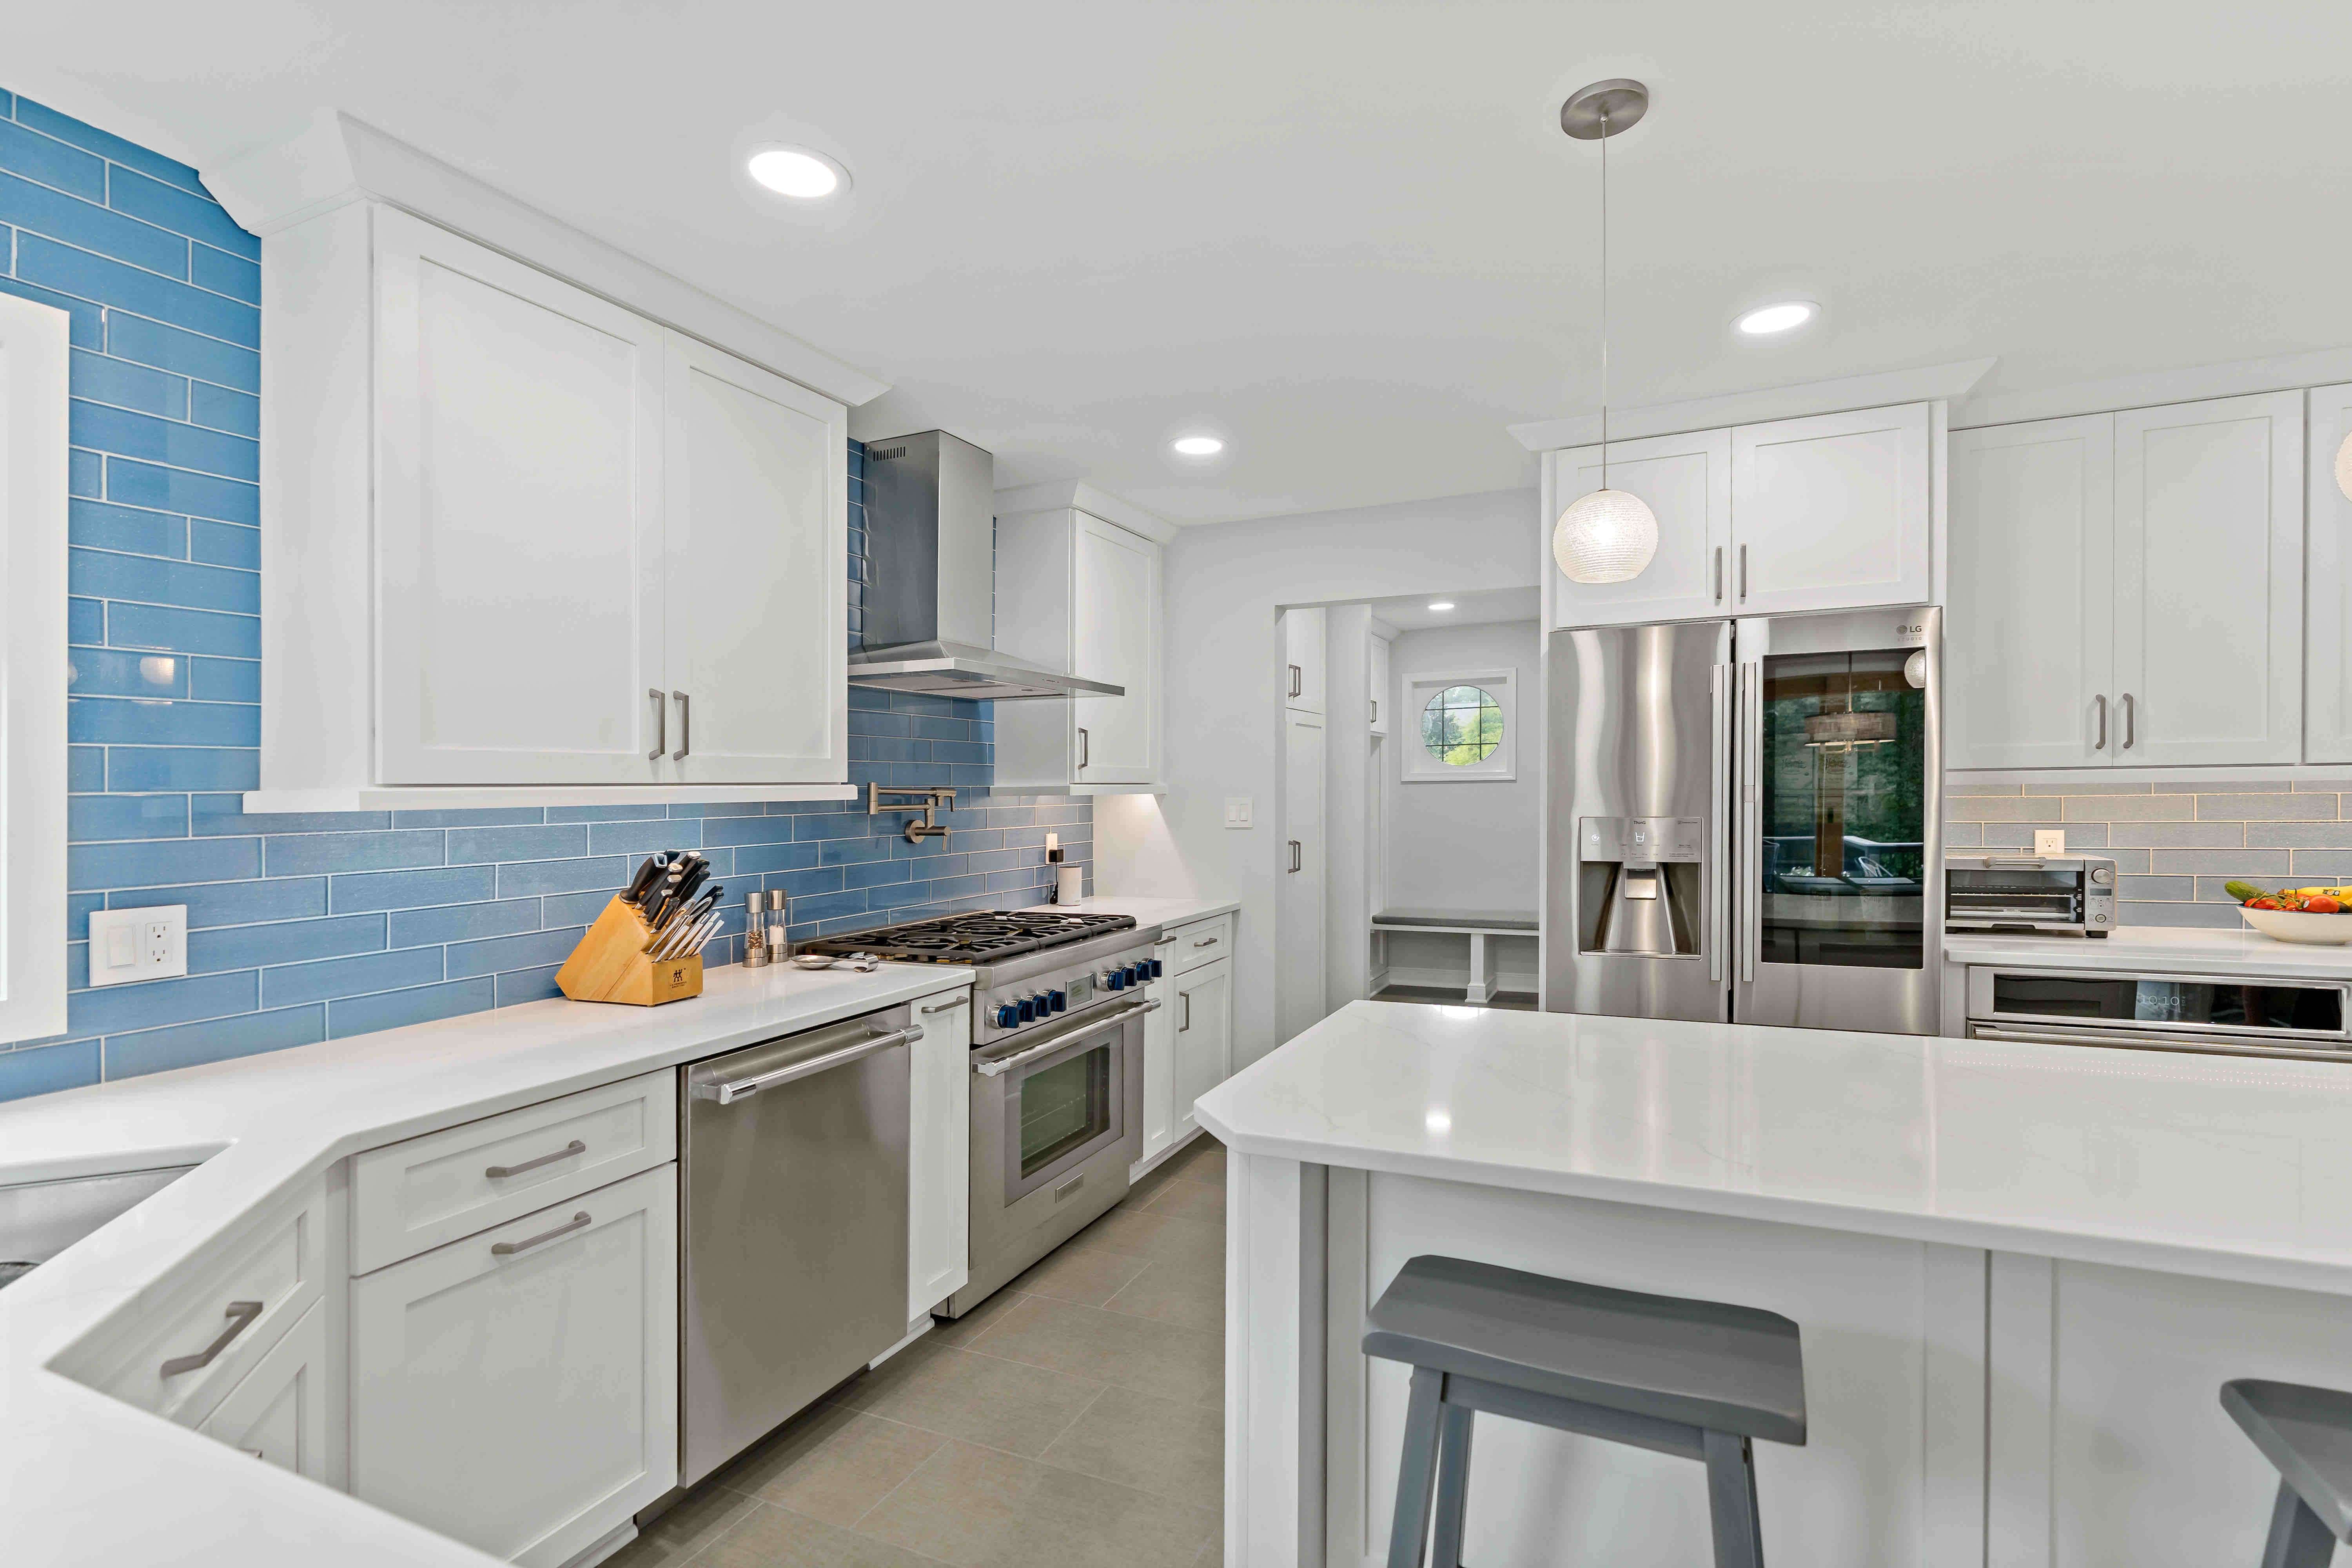 Oakton Home is Transformed with a Beautiful Remodeled Kitchen